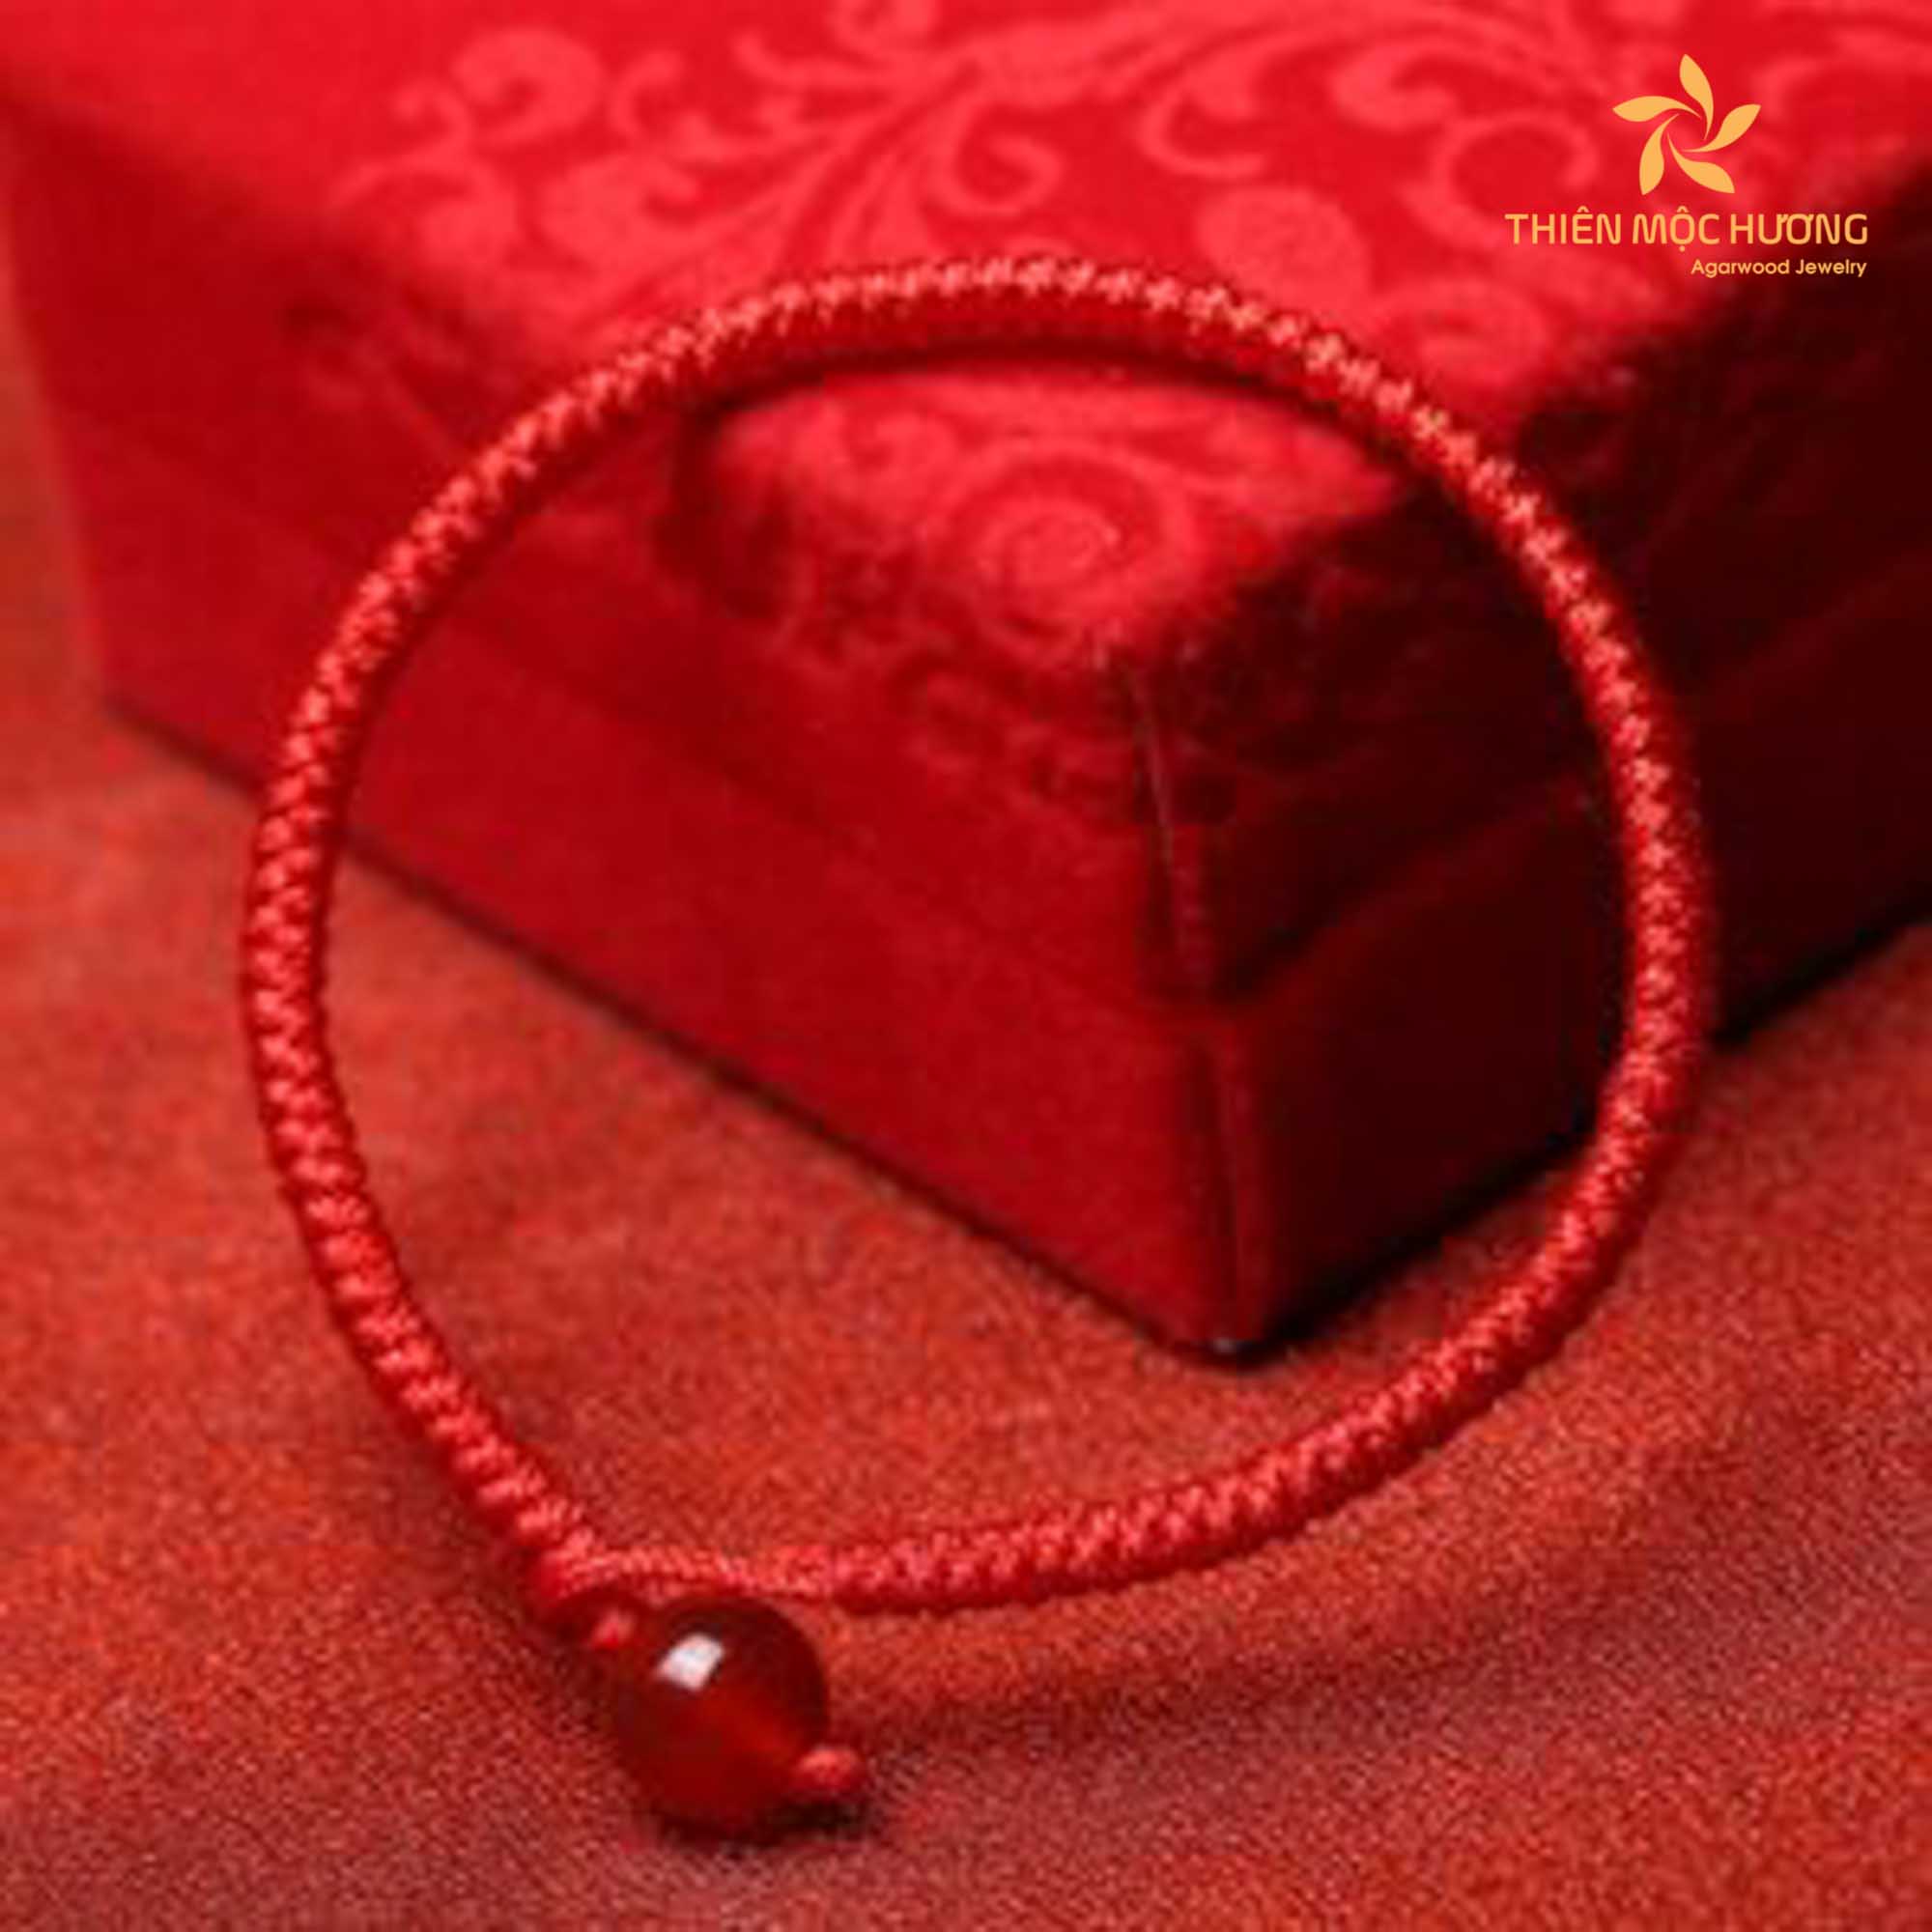 You should not throw it away in the trash or burn it, as this may be disrespectful to the spiritual significance of the red string bracelet.